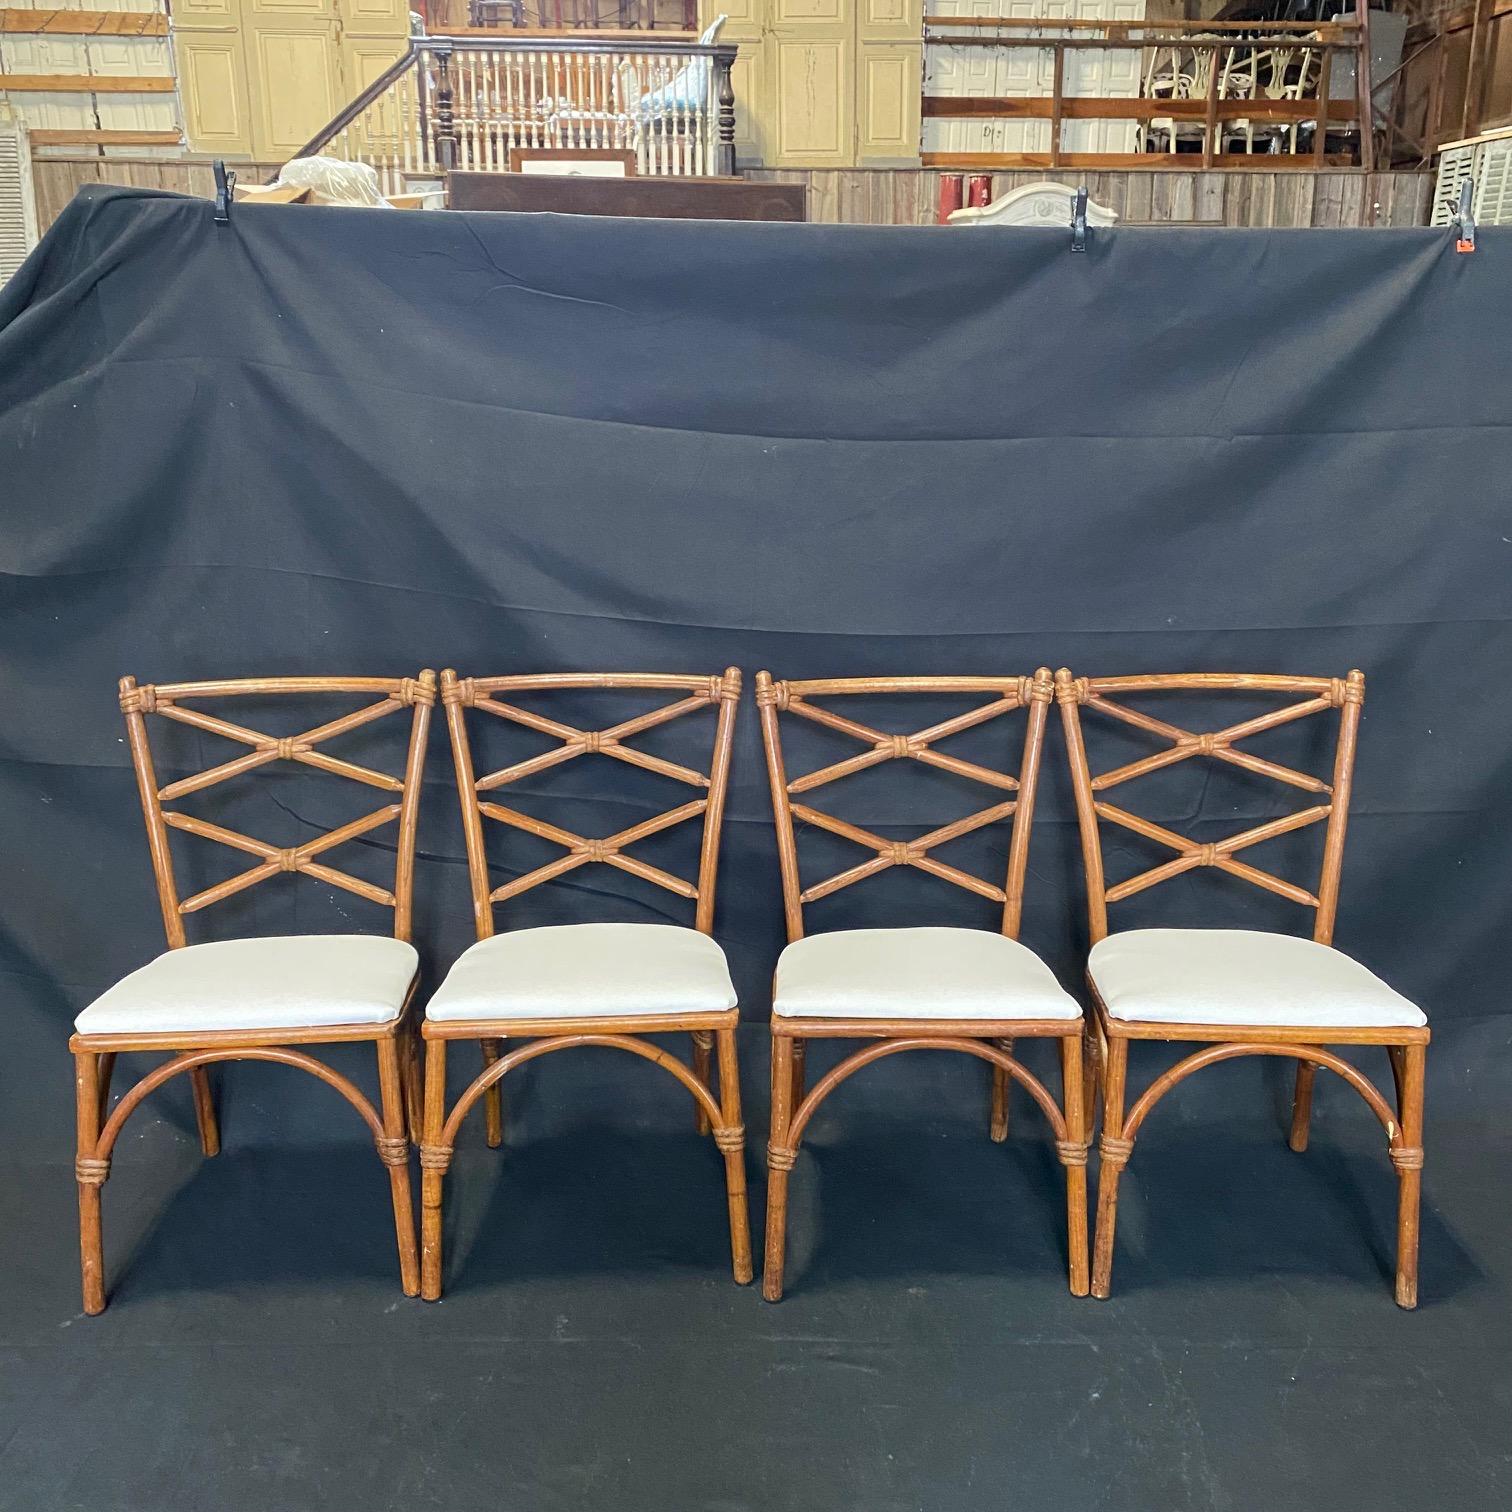 Rattan and maple vintage Heywood Wakefield Hollywood Regency style faux bamboo chairs with newly reupholstered seats. From the fabulous 1940s. Matching table is listed and sold separately.
seat height 17